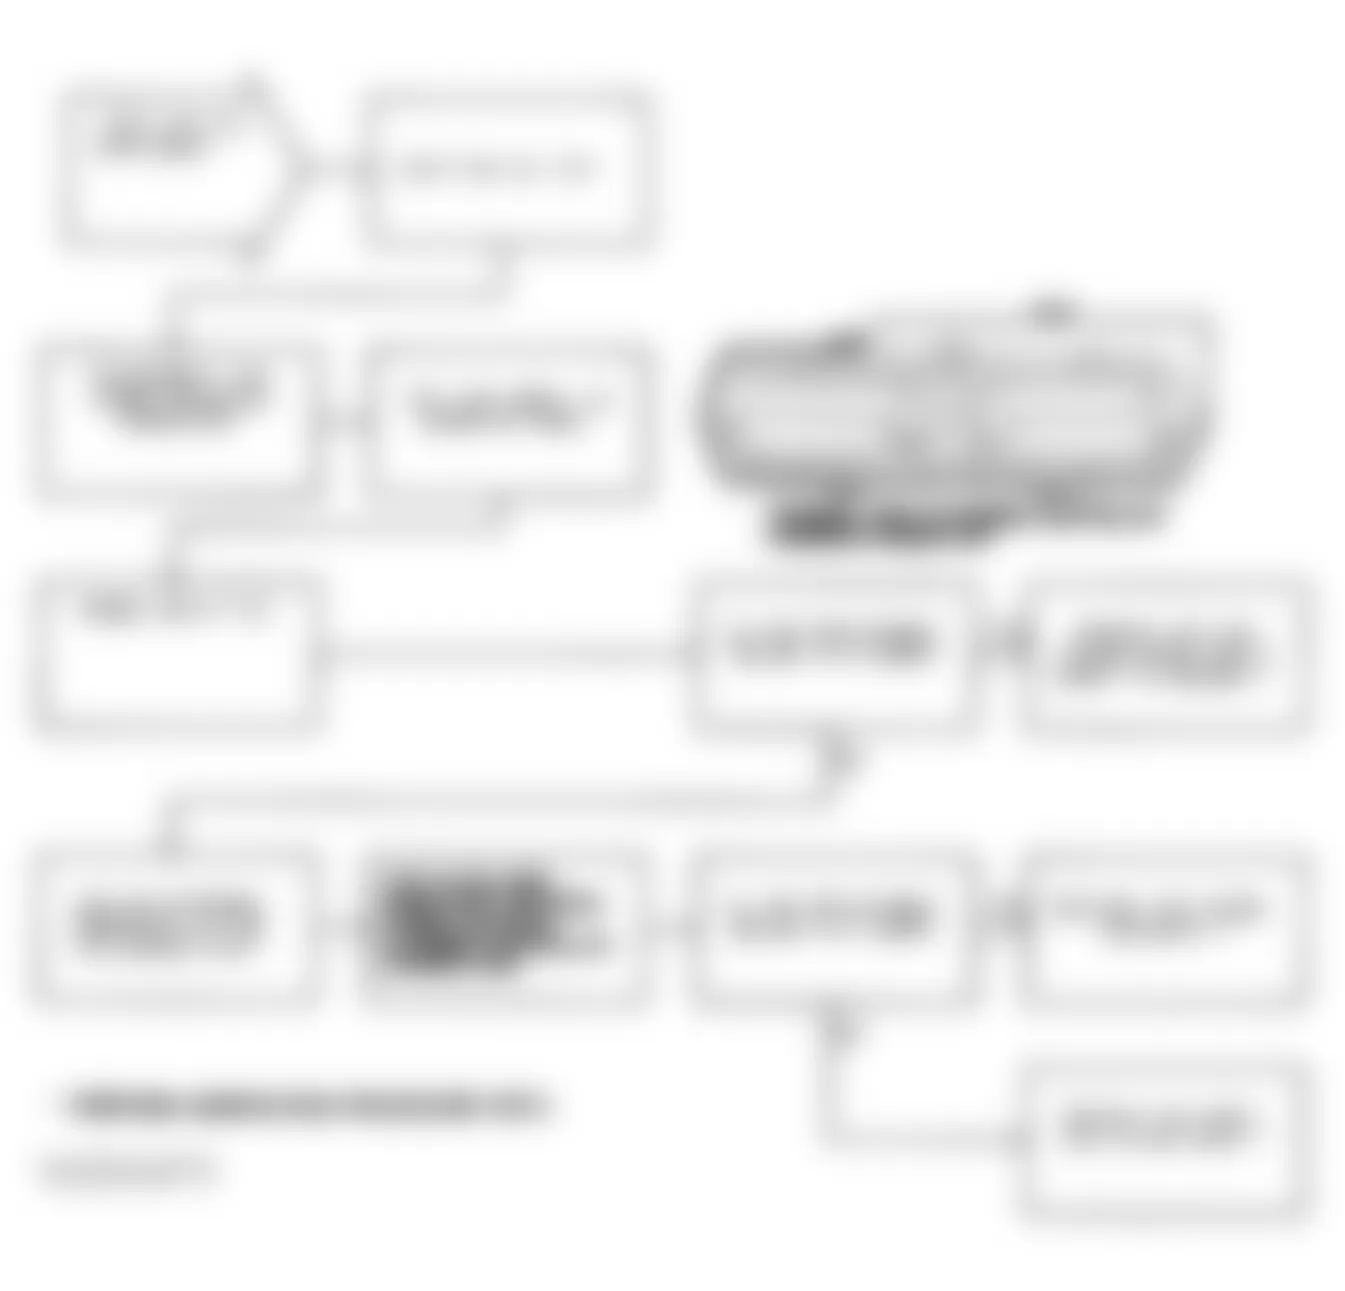 Chrysler New Yorker Salon 1991 - Component Locations -  Test DR-21A Code 31: Flowchart (3 of 3)